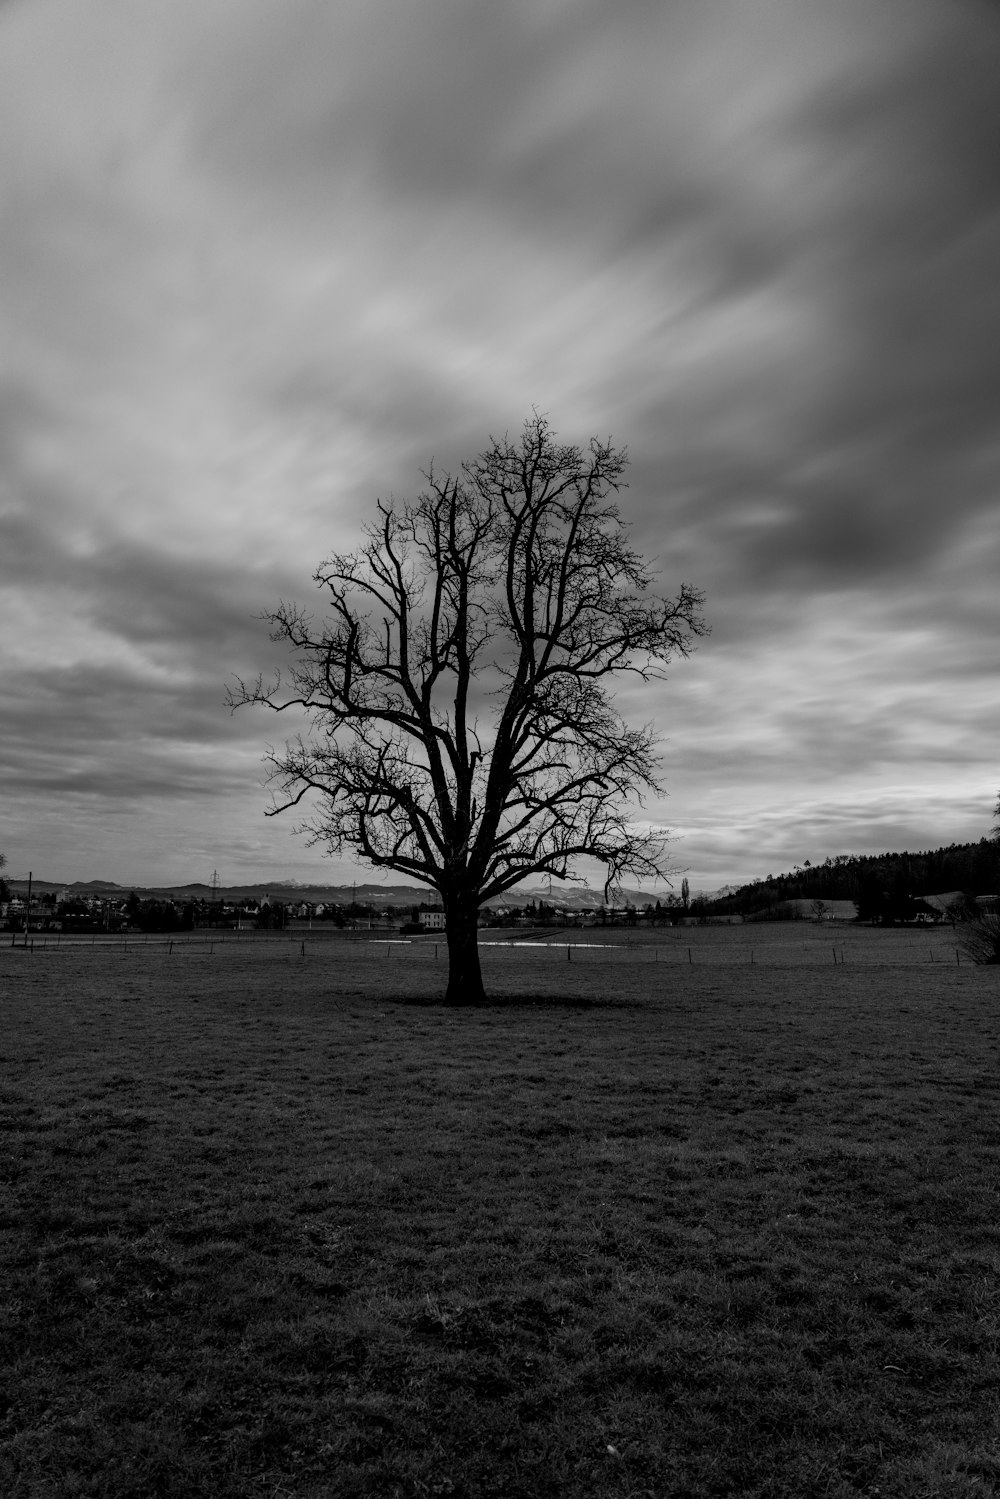 grayscale photo of bare tree on grass field